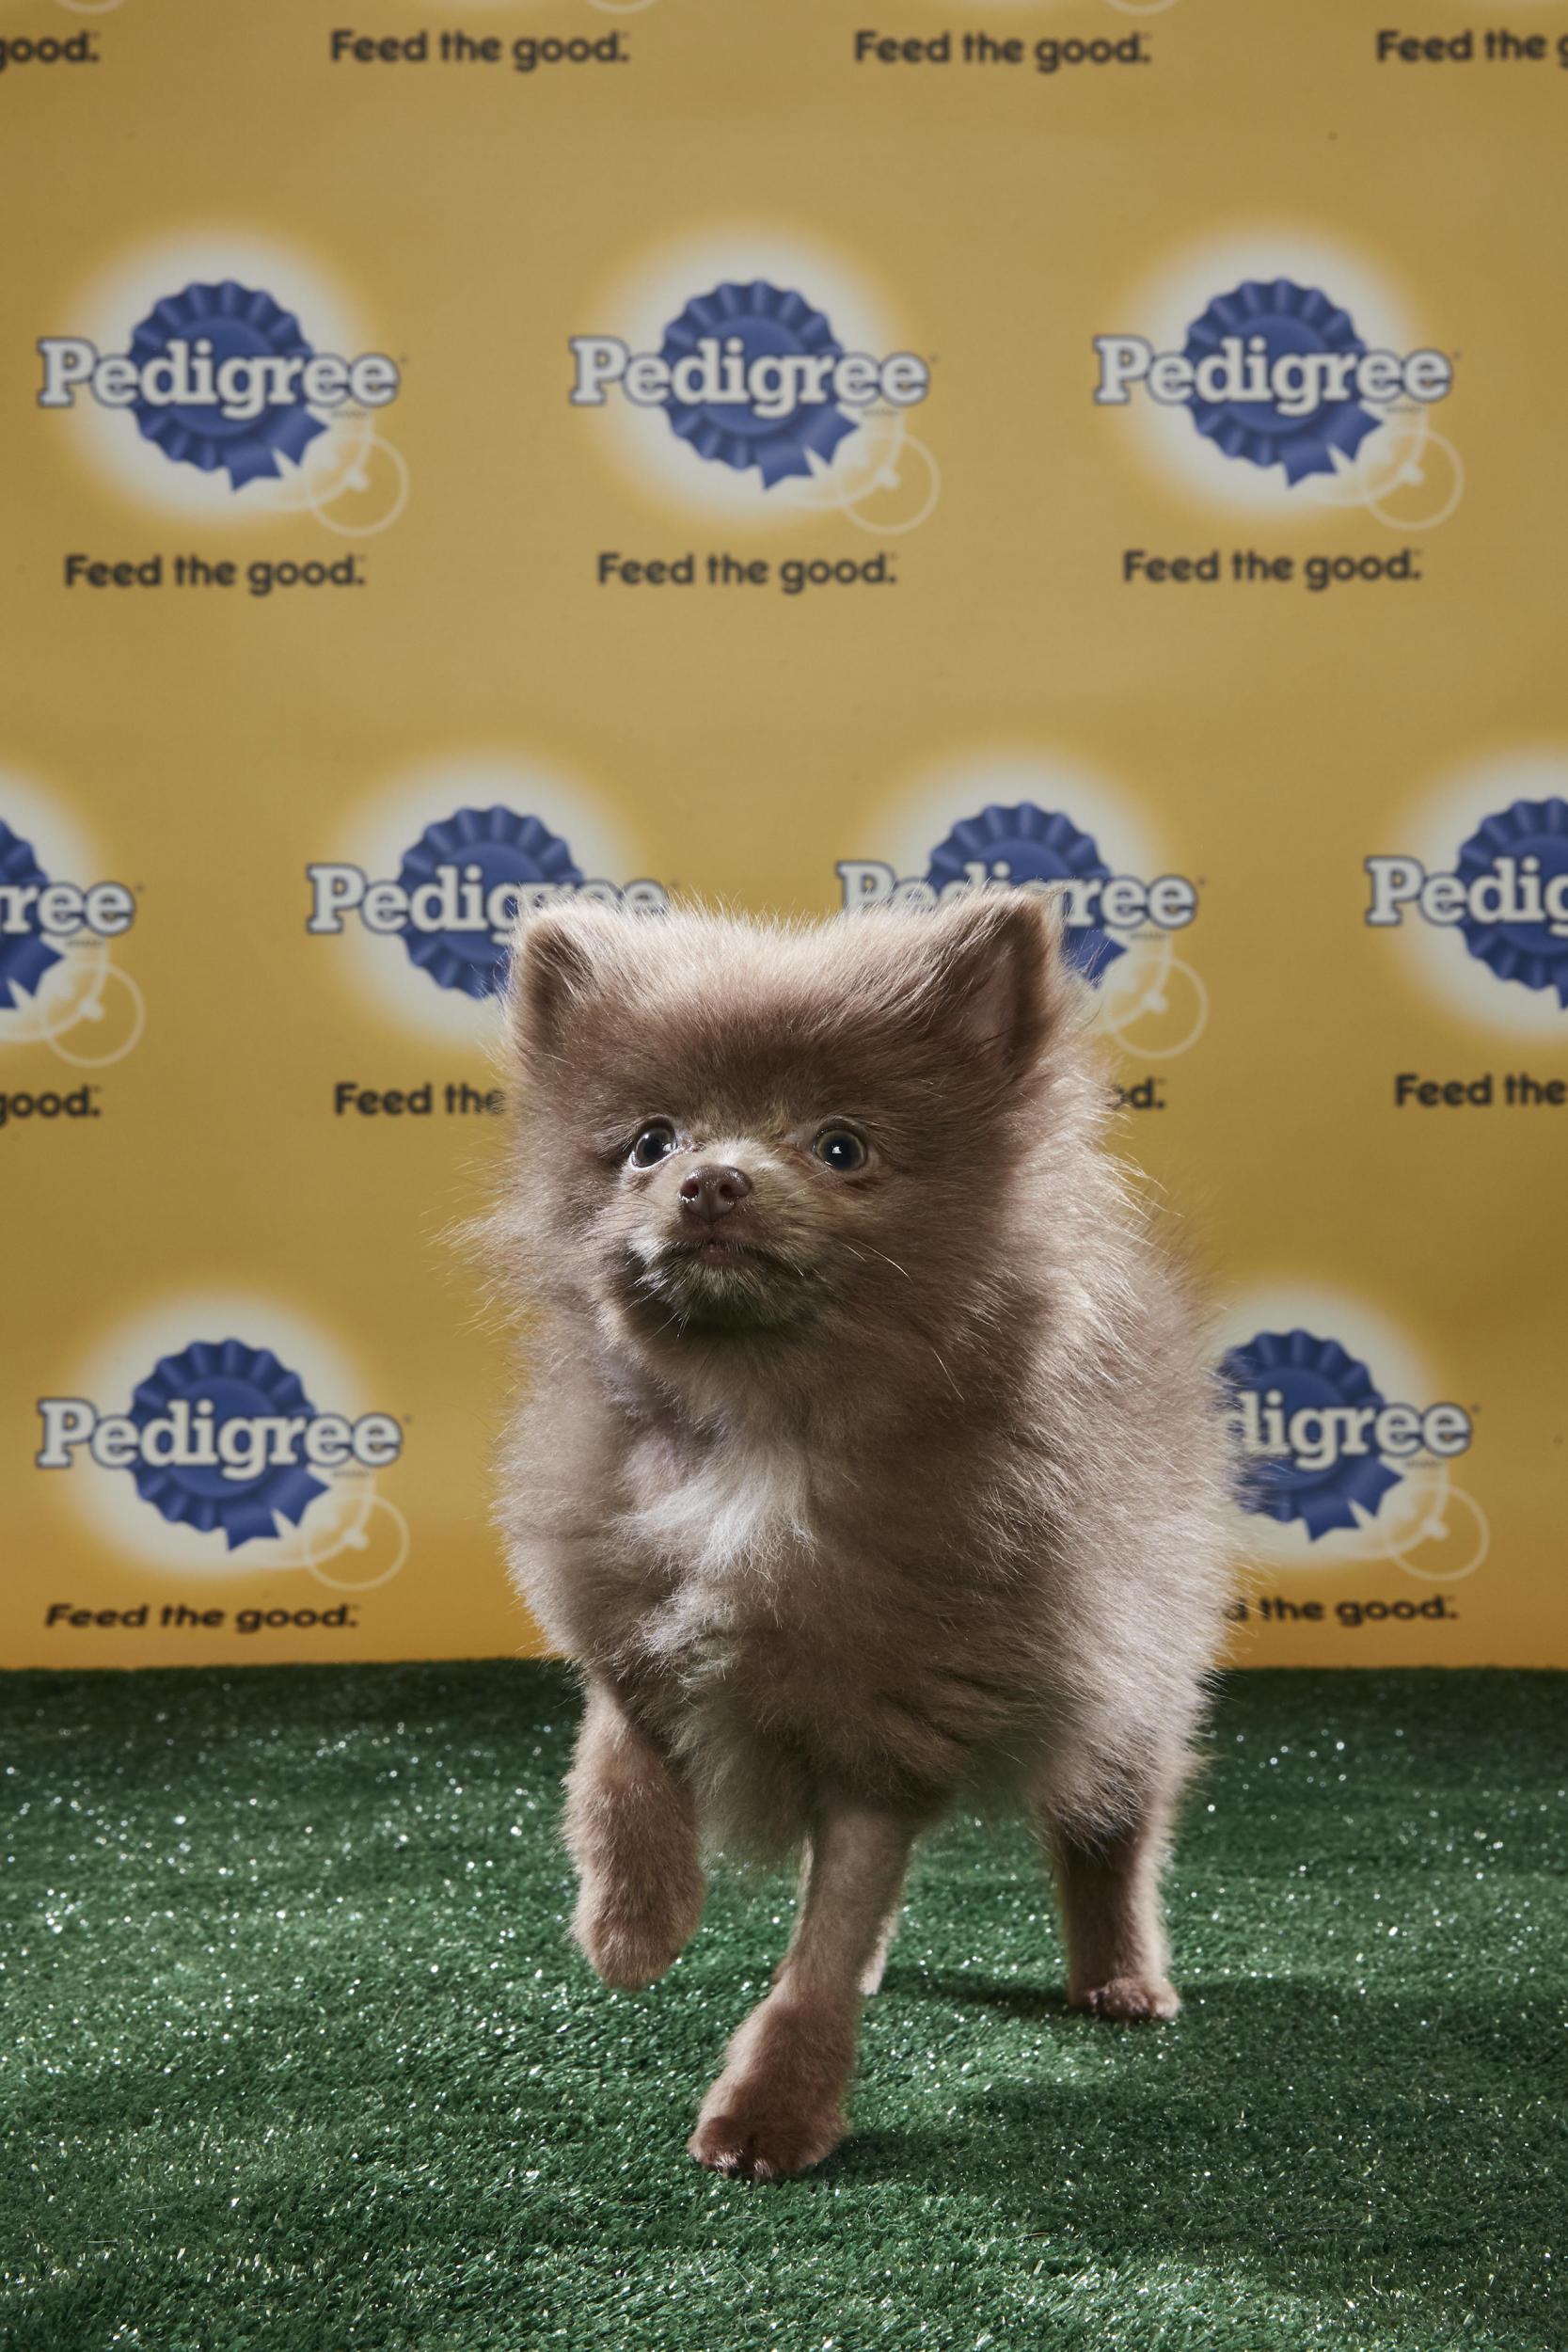 There will be over 90 puppies in Puppy Bowl XIV (Animal Planet)